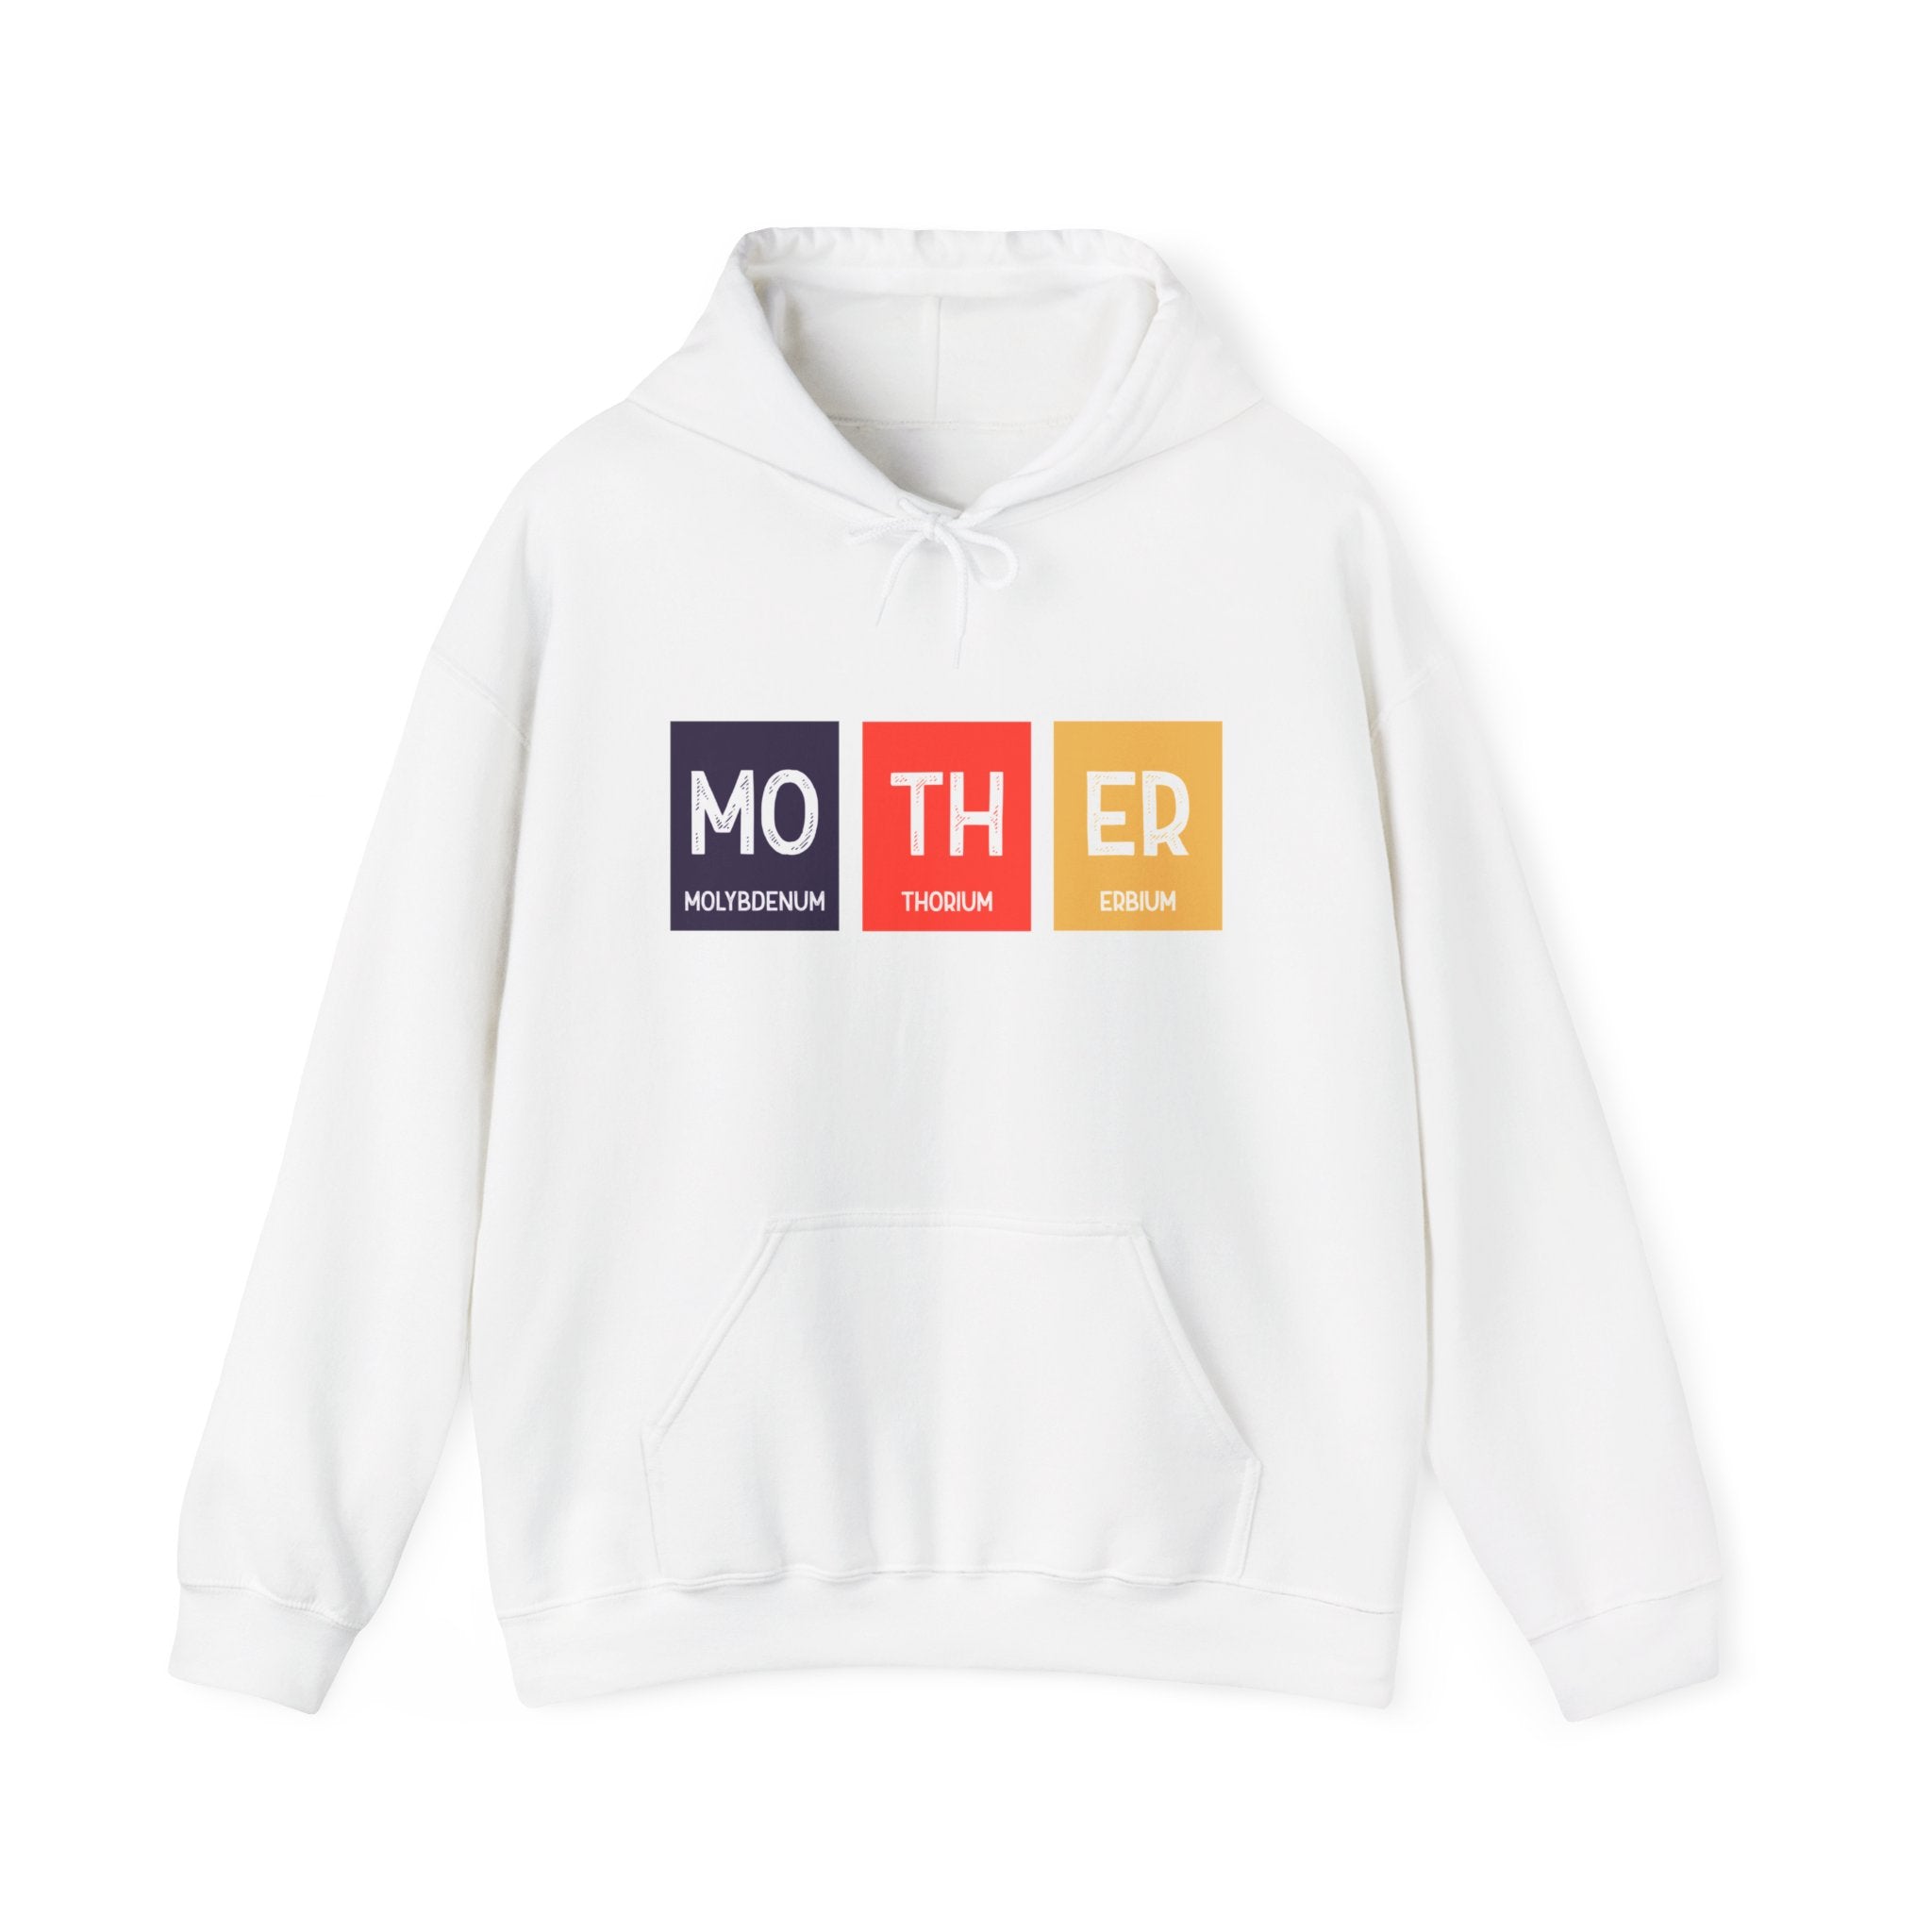 A Mo-TH-ER - Hooded Sweatshirt featuring the Mo-TH-ER design, with "MOTHER" spelled out using periodic table elements Molybdenum (Mo), Thorium (Th), and Erbium (Er) on the front, offering a relaxed style.